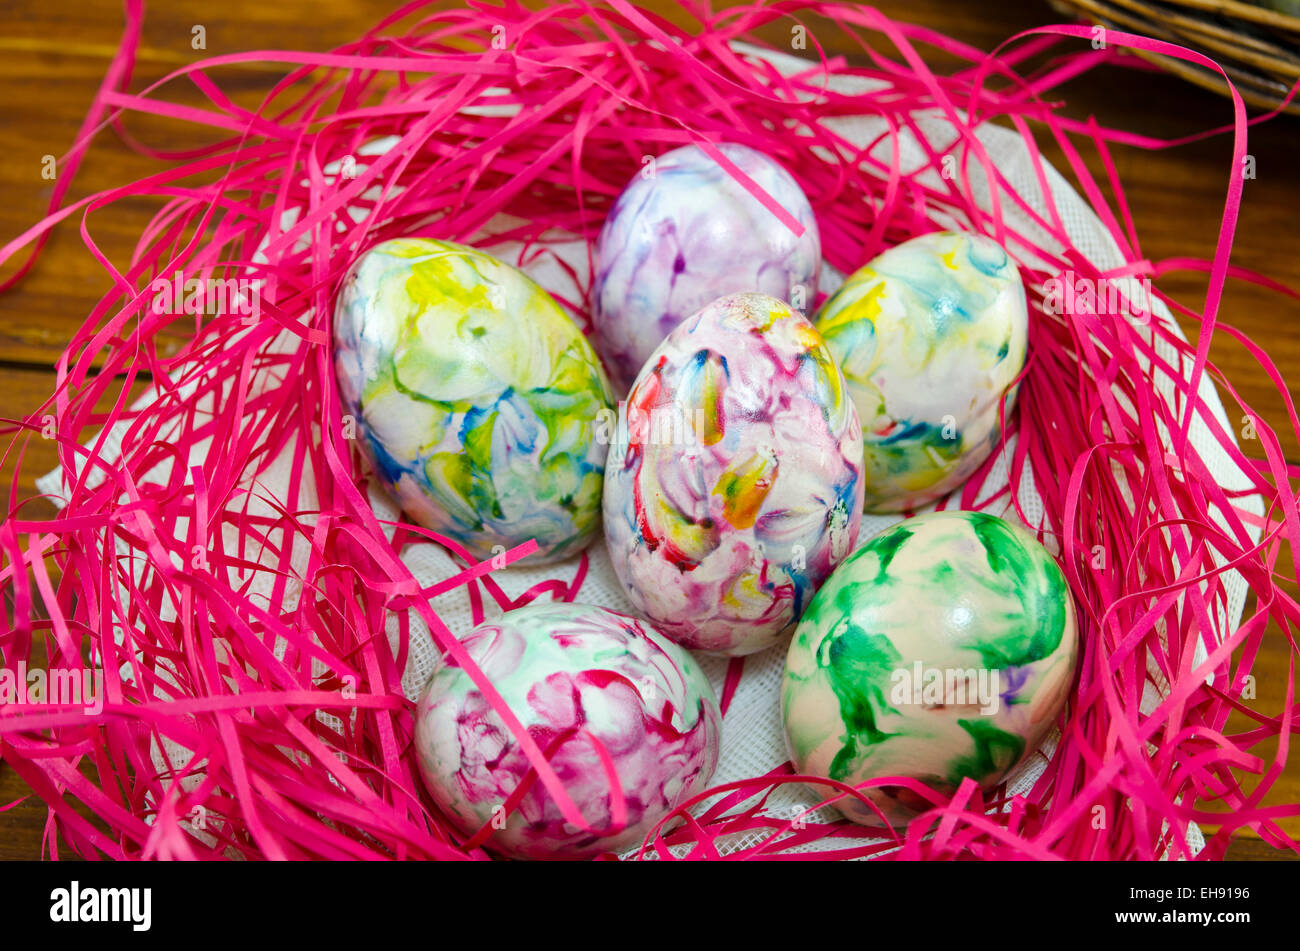 Colorful and painted eggs in a pink nest on a wooden table Stock Photo